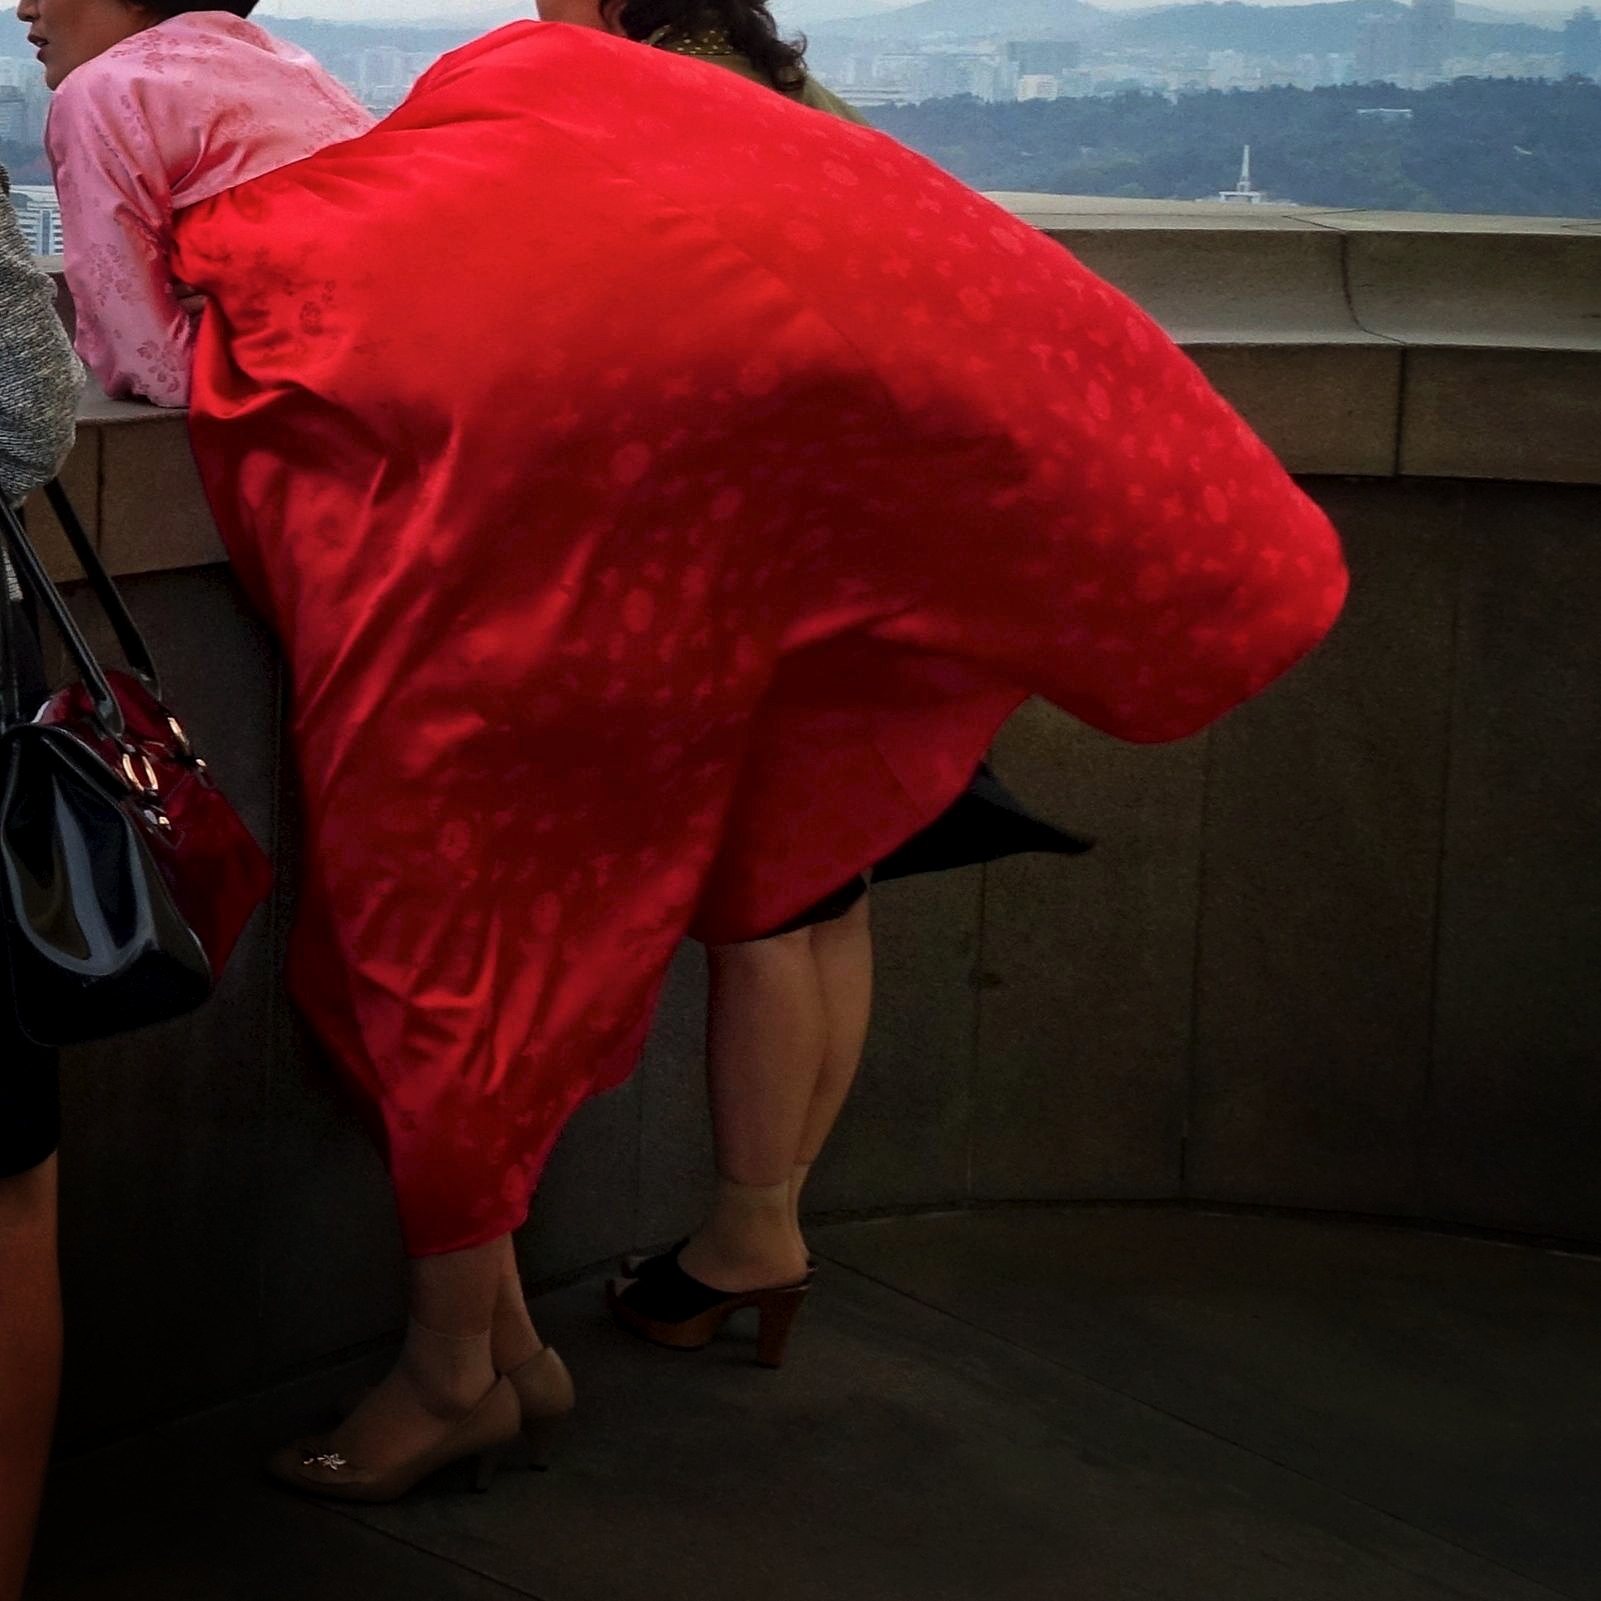 A woman's traditional dress billows in the strong breeze on top of Juche Tower in Pyongyang.